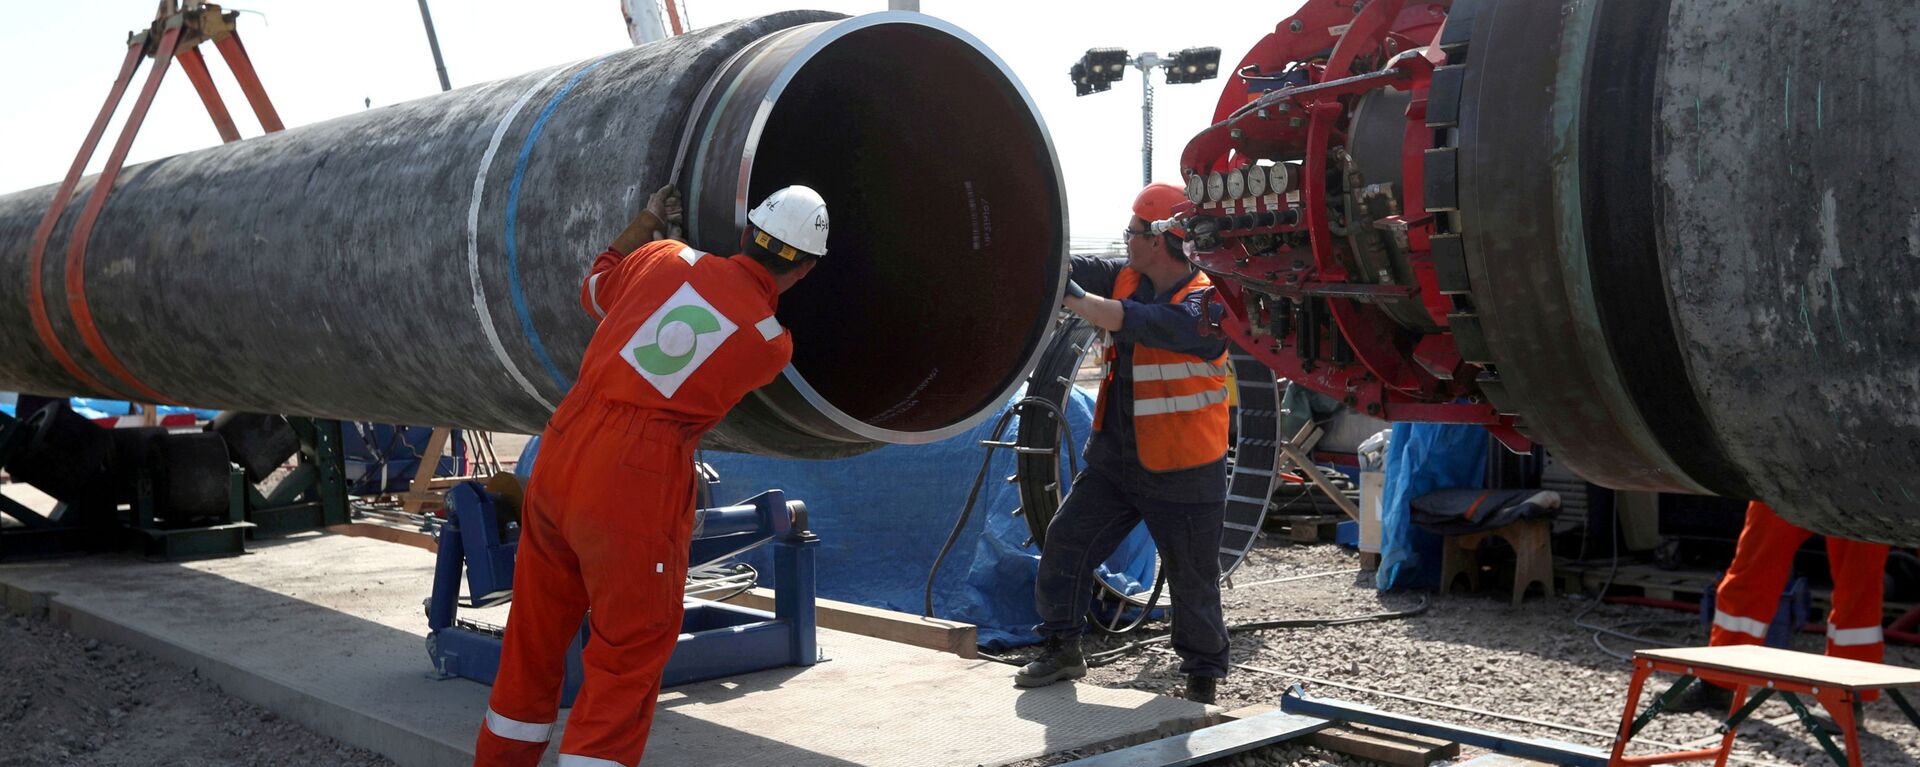 FILE PHOTO: Workers are seen at the construction site of the Nord Stream 2 gas pipeline, near the town of Kingisepp, Leningrad region, Russia, June 5, 2019 - Sputnik International, 1920, 27.10.2021